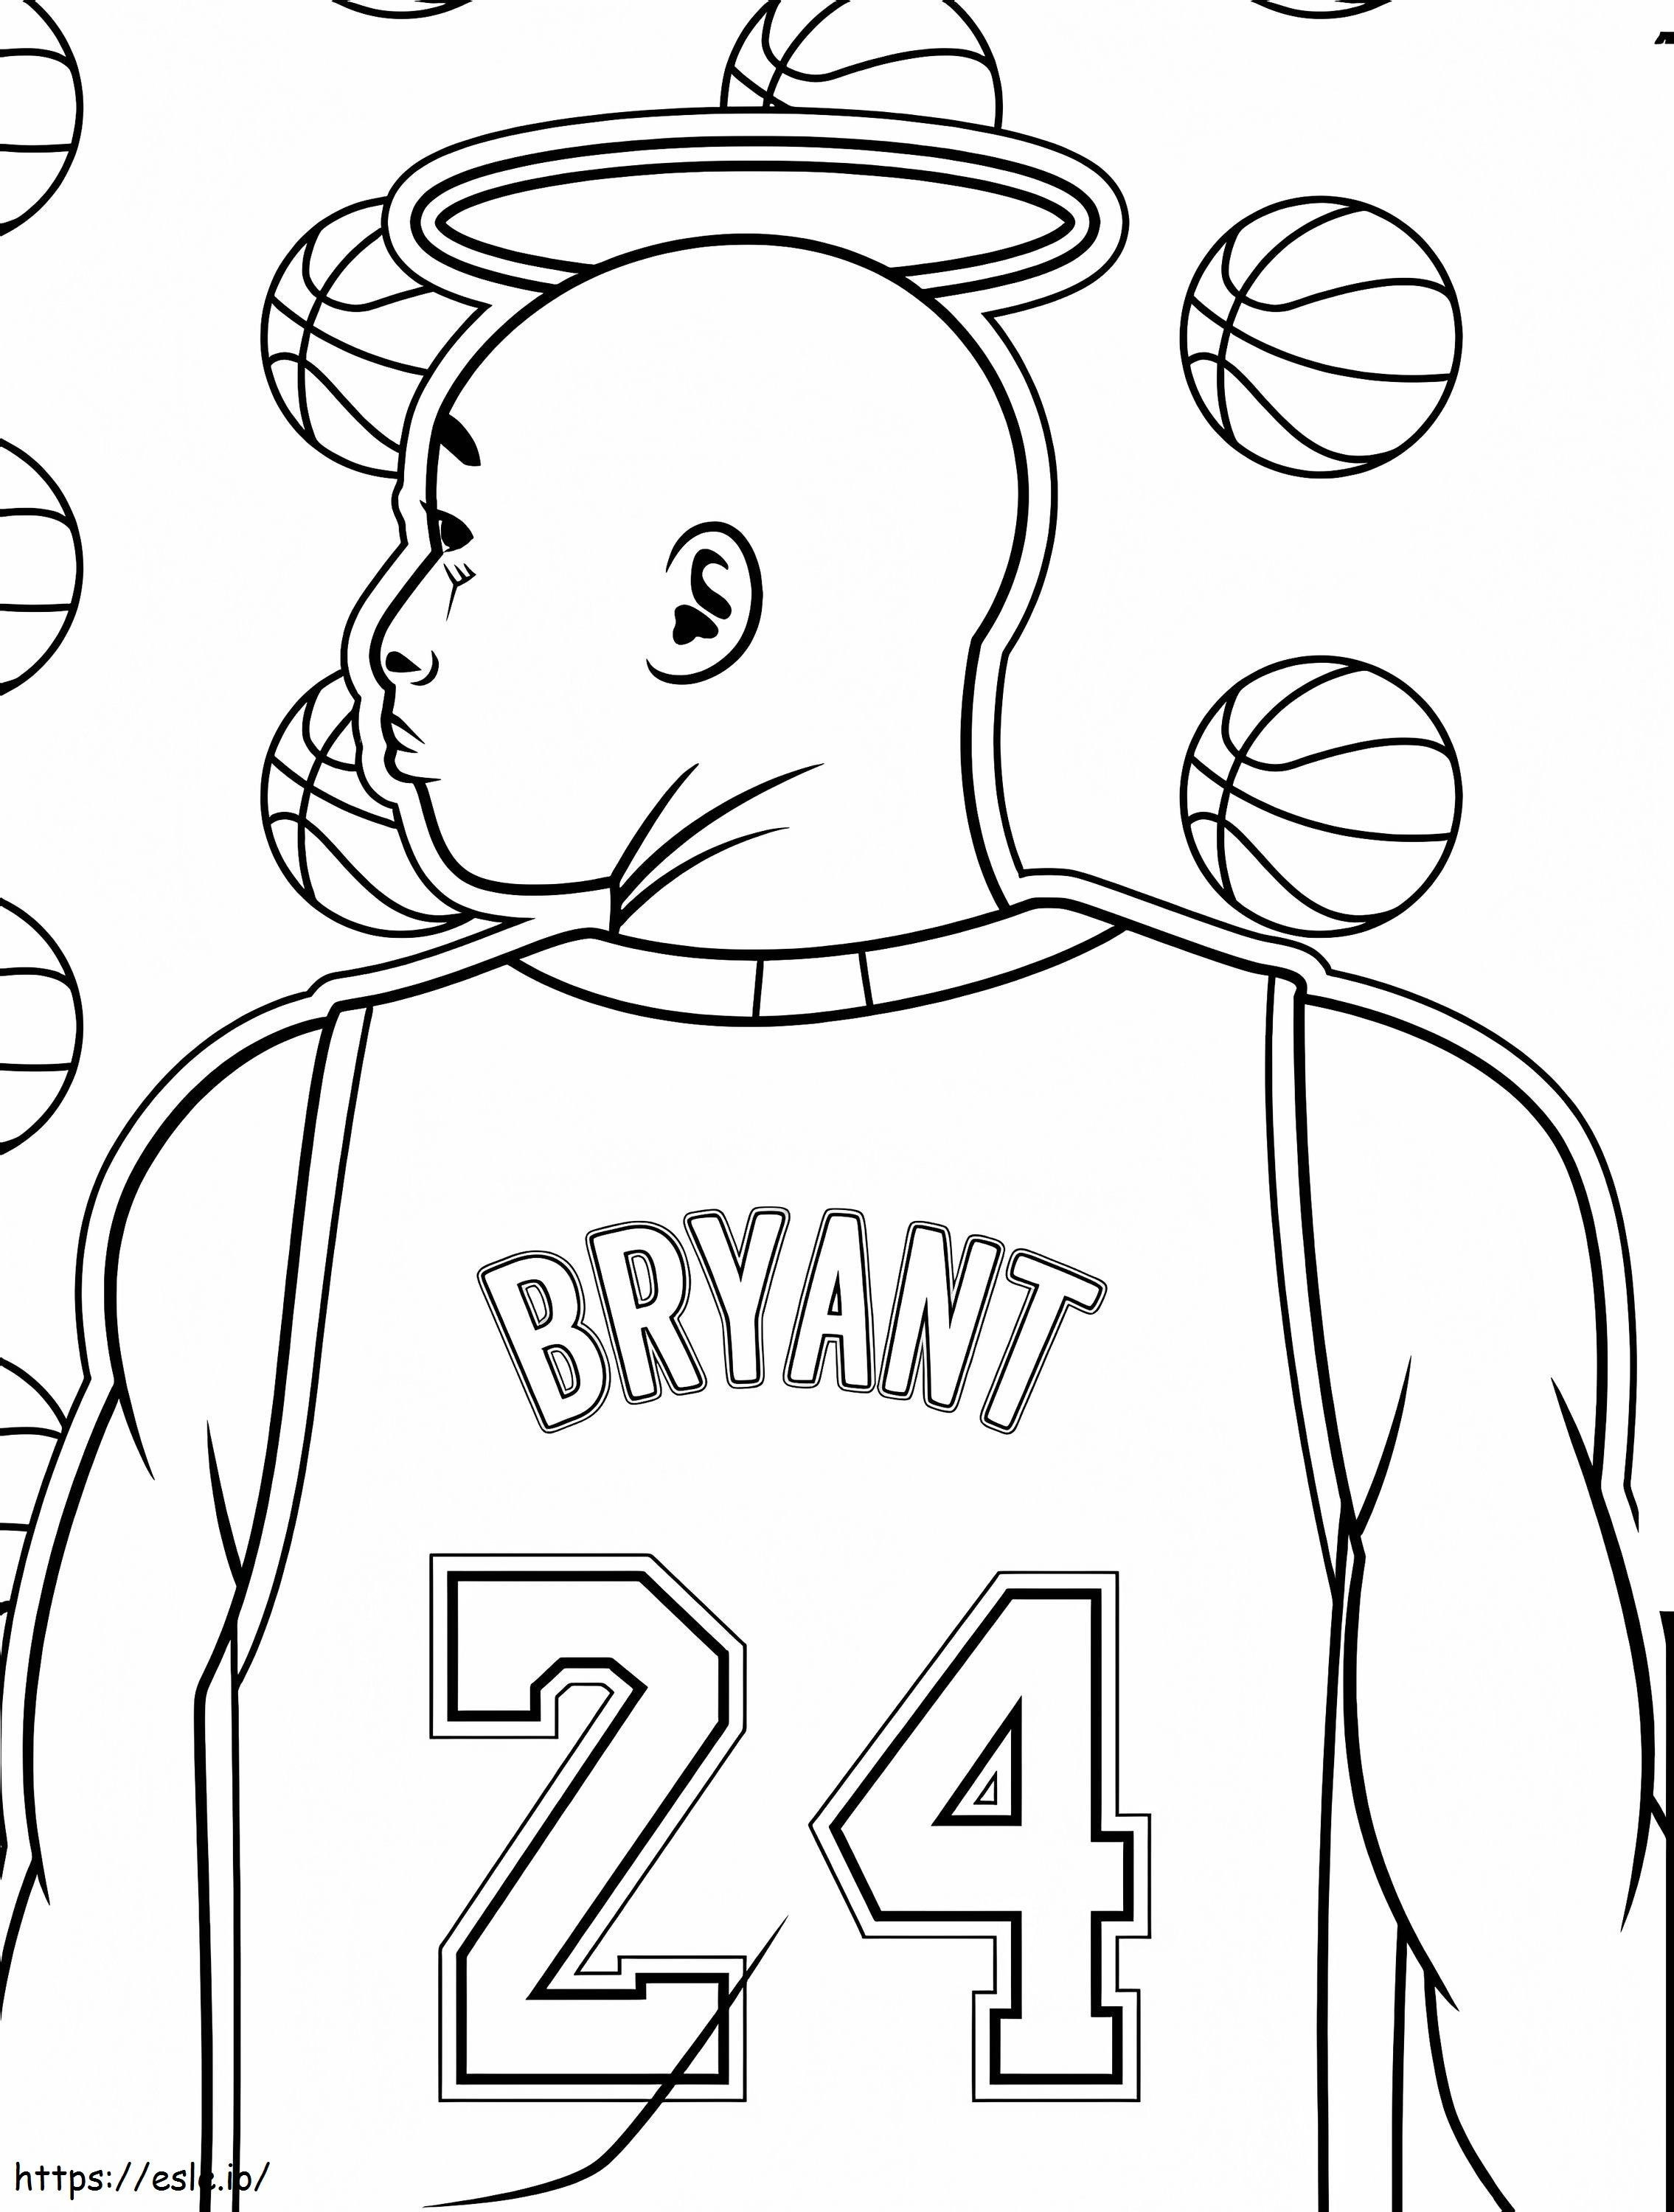 Awesome Kobe Bryant coloring page